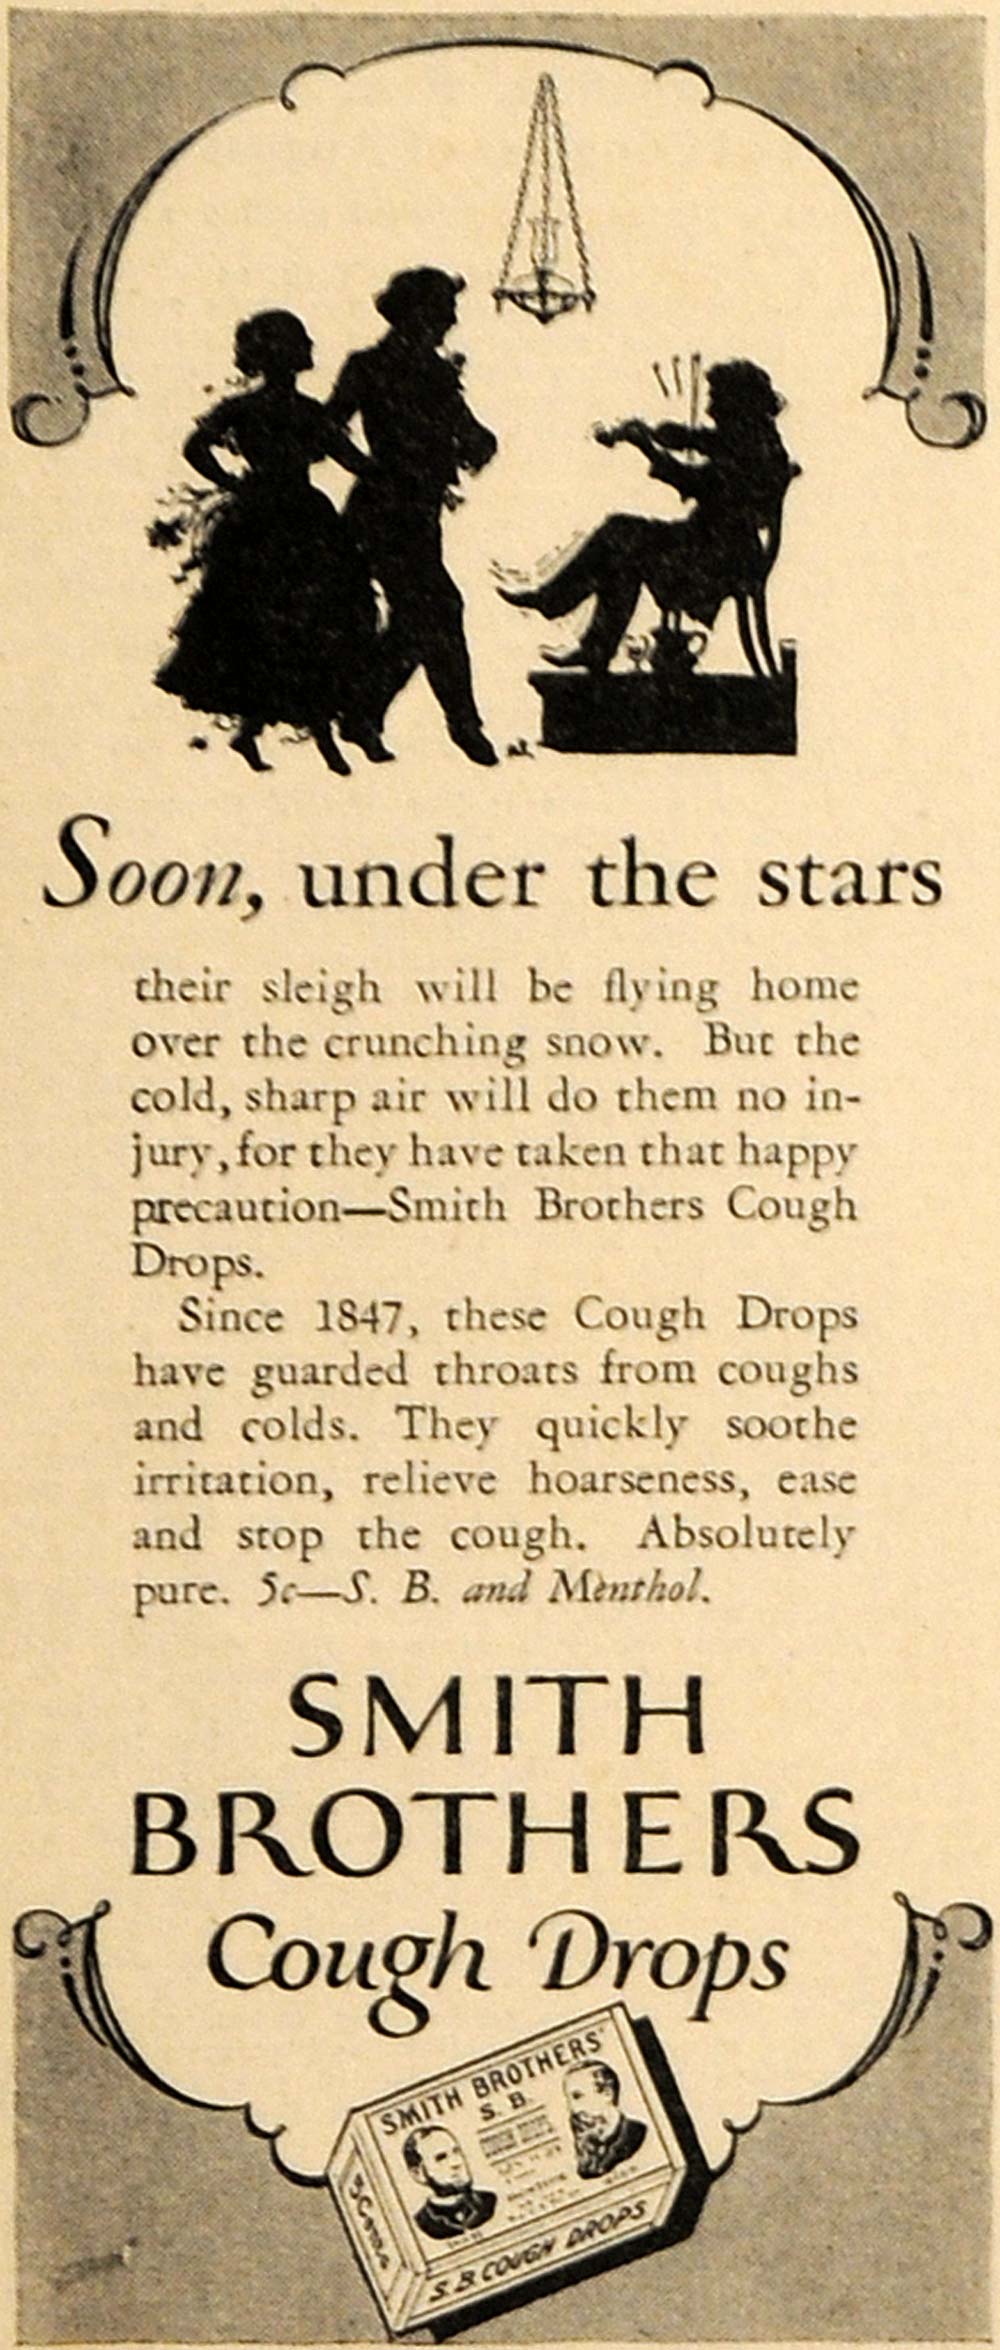 1928 Ad Smith Brothers Cough Drops Medicated Sweet - ORIGINAL ADVERTISING MCC2